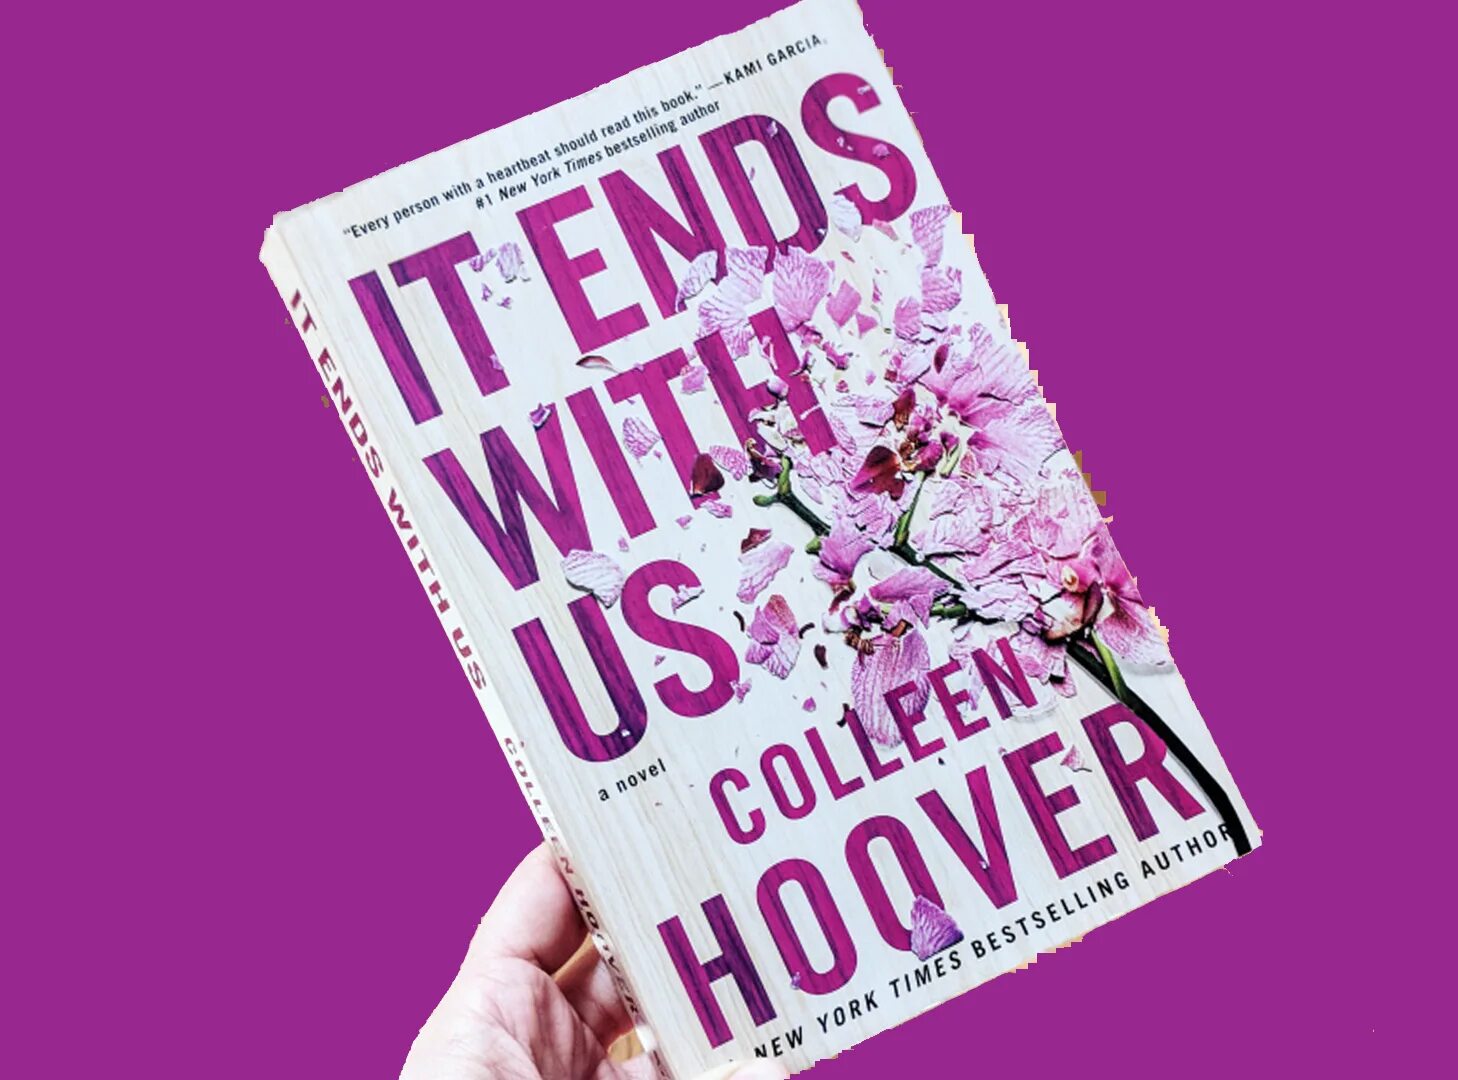 It ends with us Colleen Hoover книга. It ends with us Коллин Хувер. It ends with us книга. It ends with us Коллин Хувер книга. This book yet